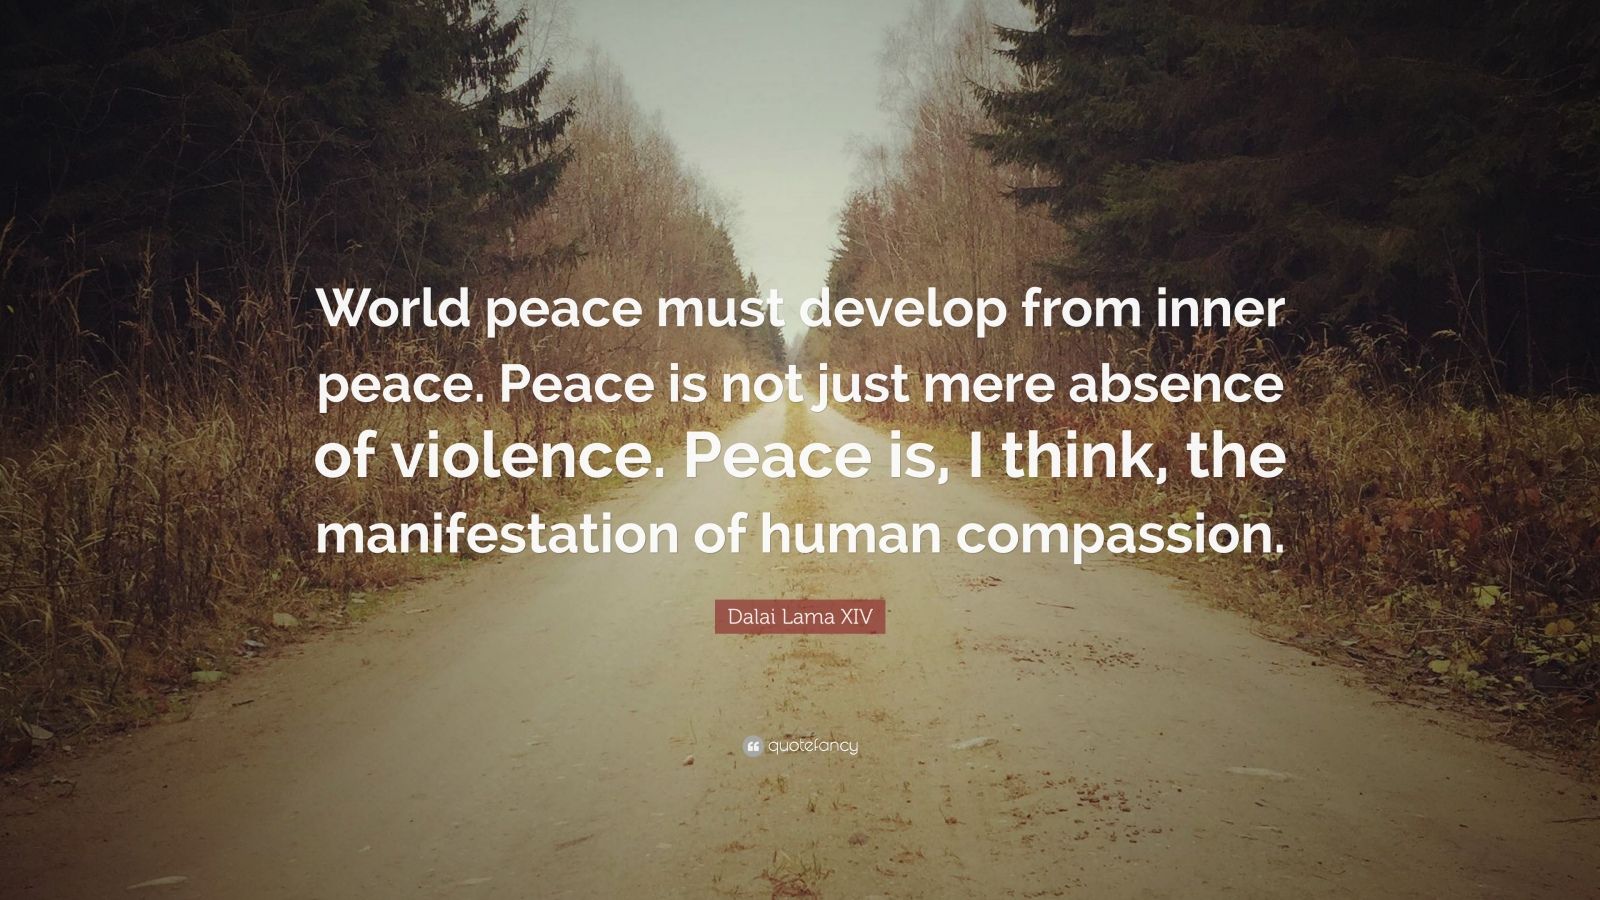 Dalai Lama XIV Quote: “World peace must develop from inner peace. Peace